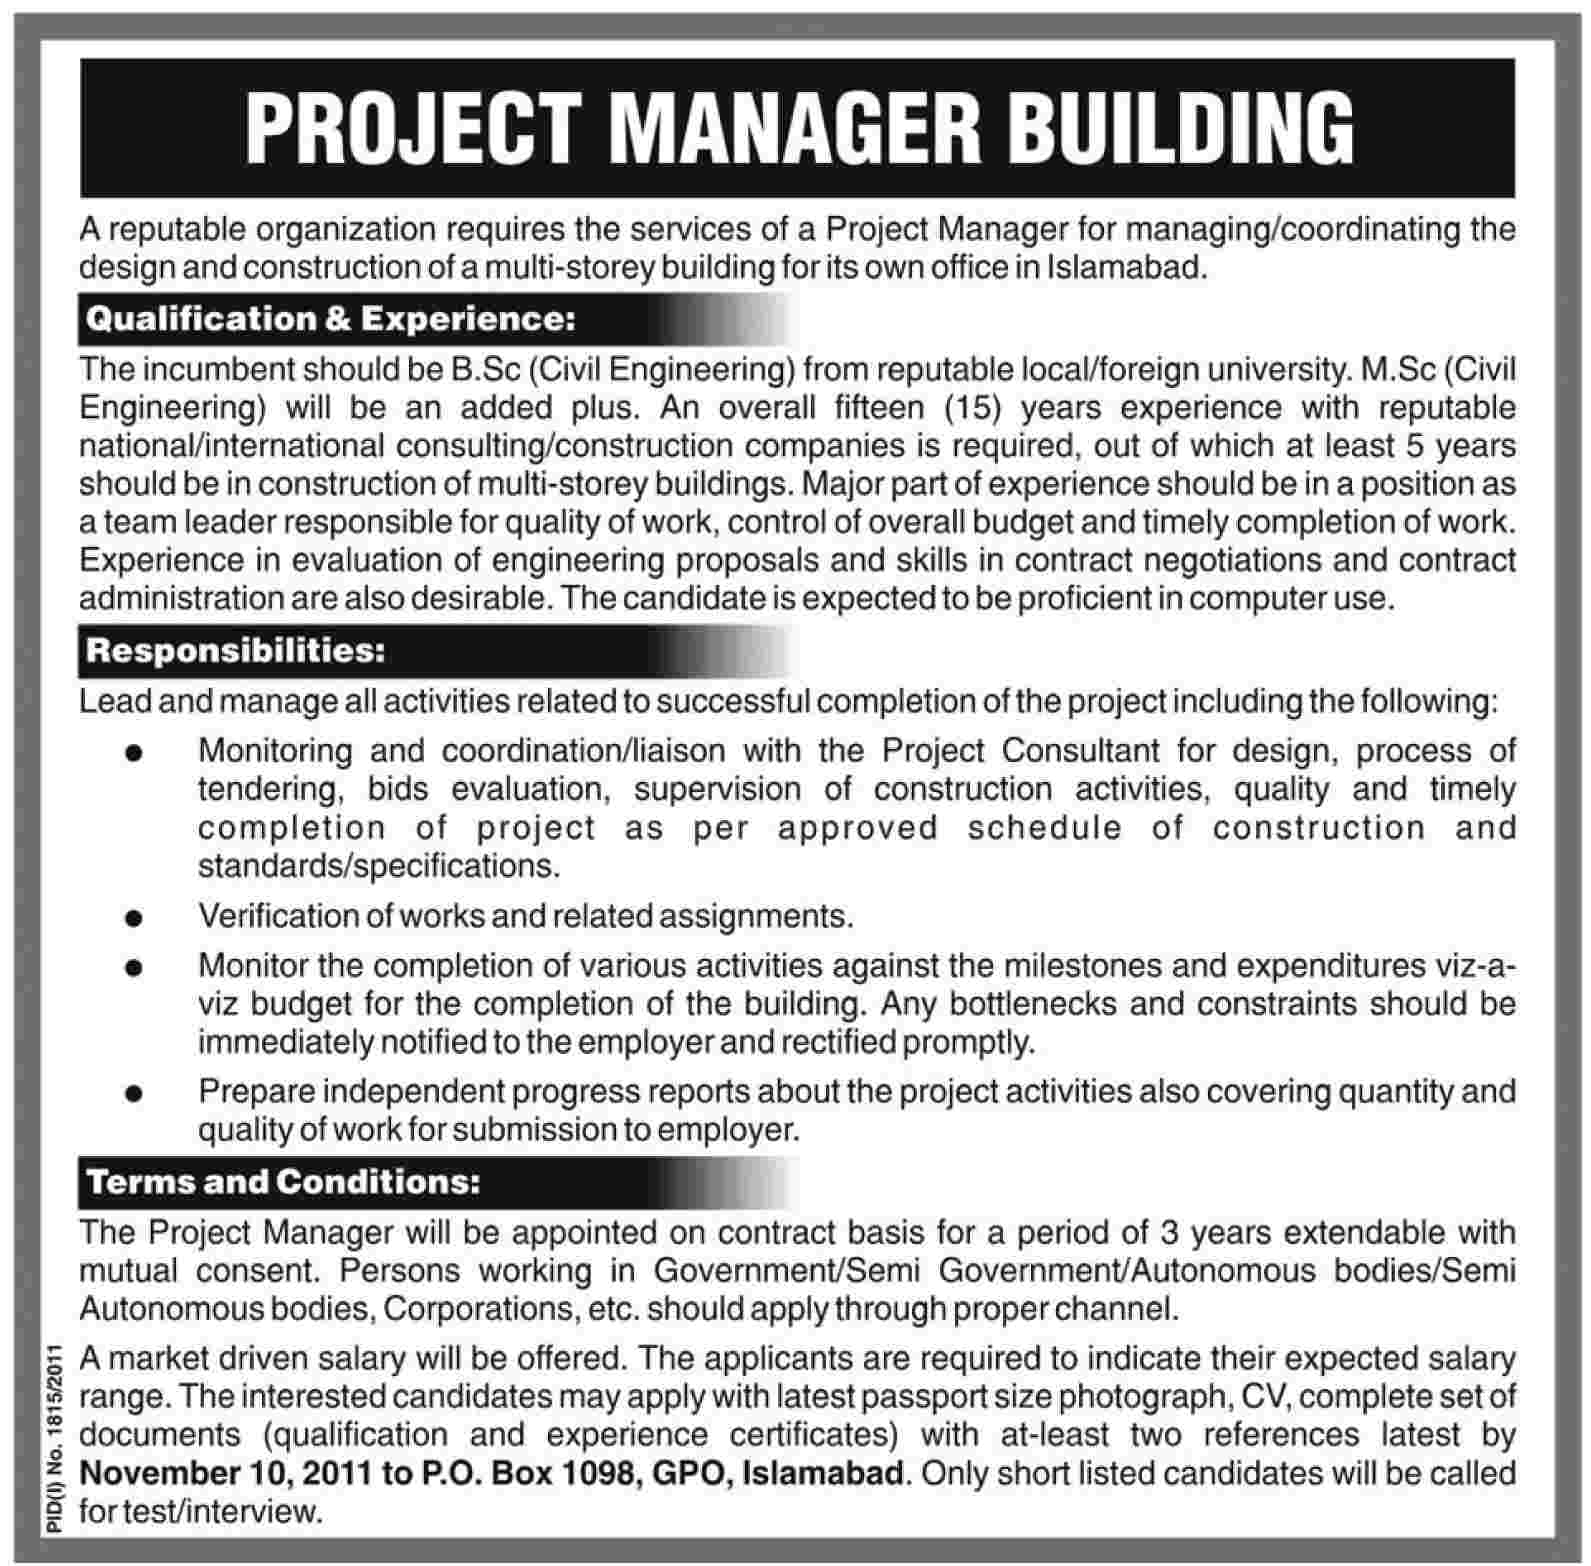 Project Manager Building Required by an Organization